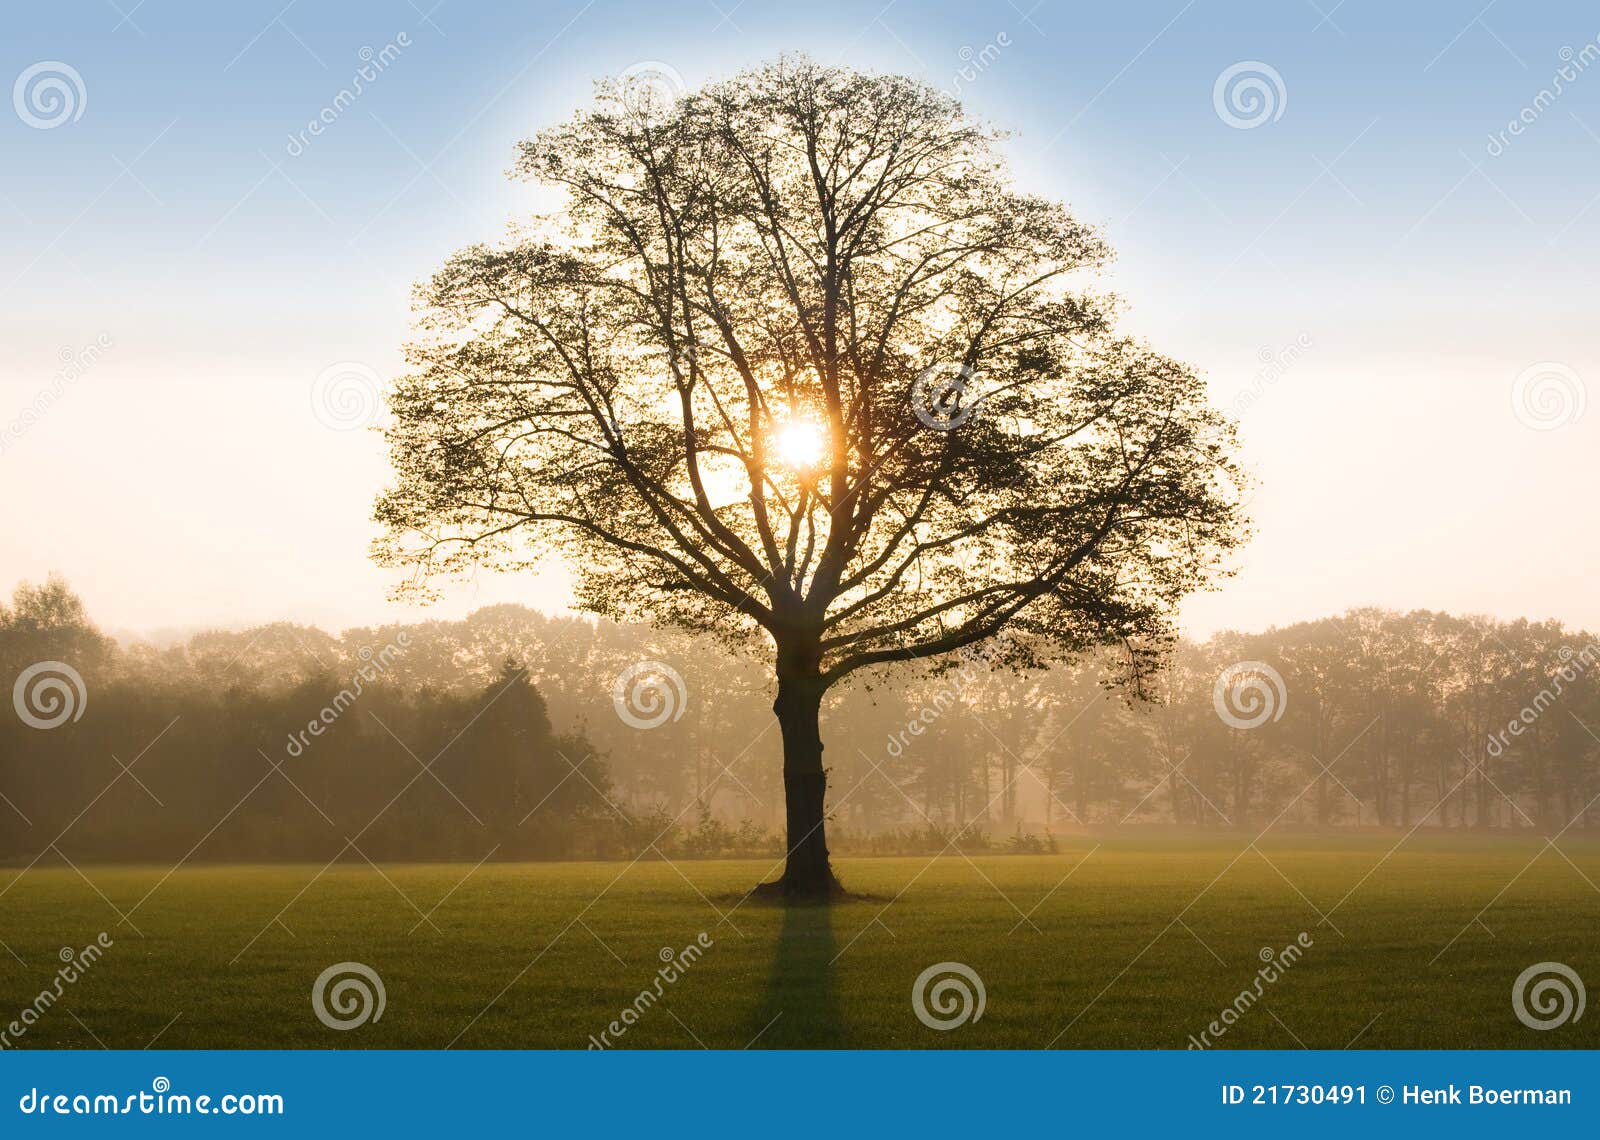 tree in sunrise with backlit